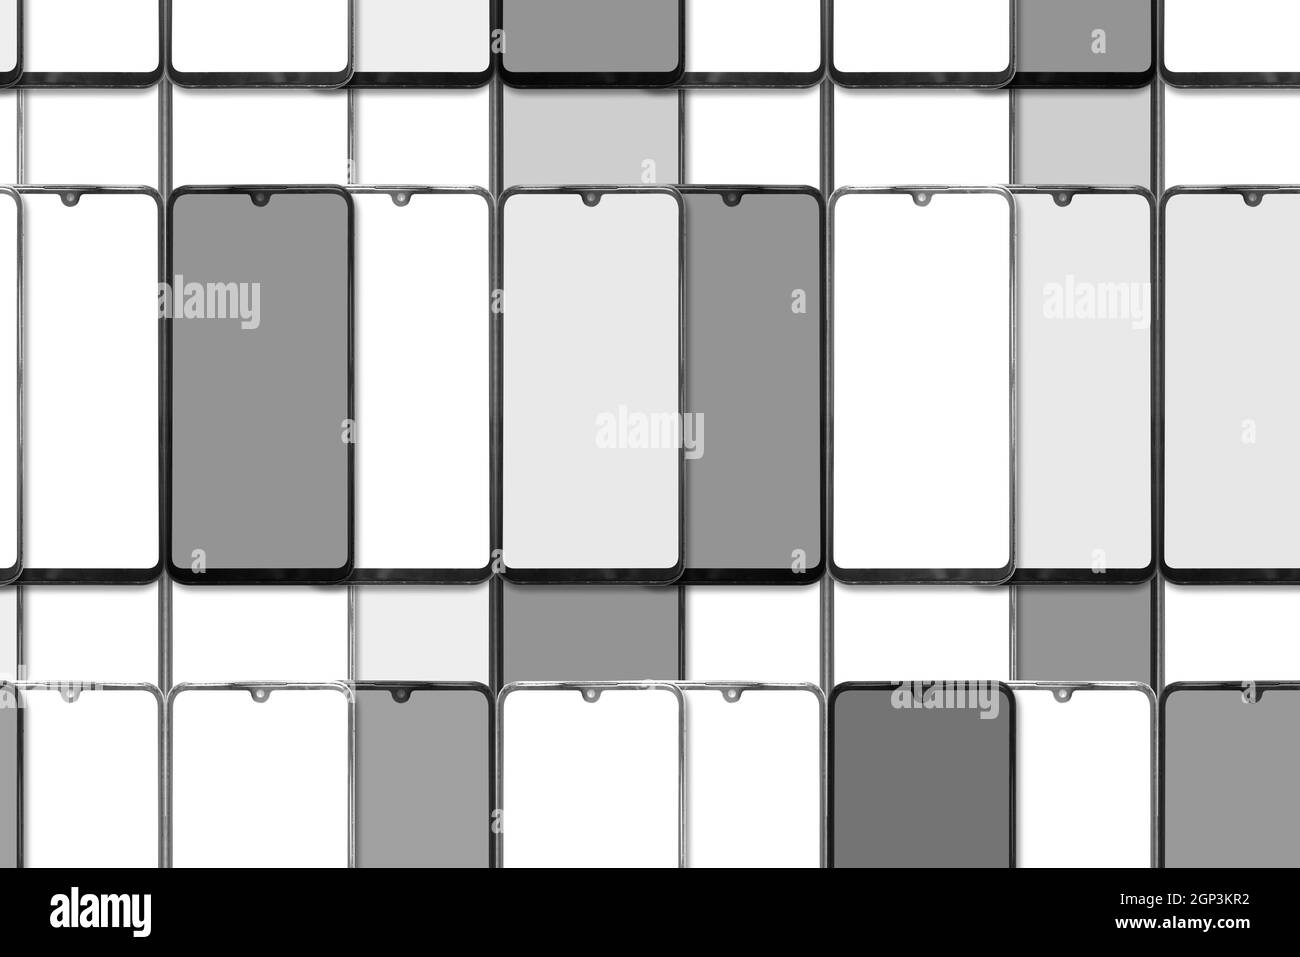 A lot of smartphones with blank screens Stock Photo